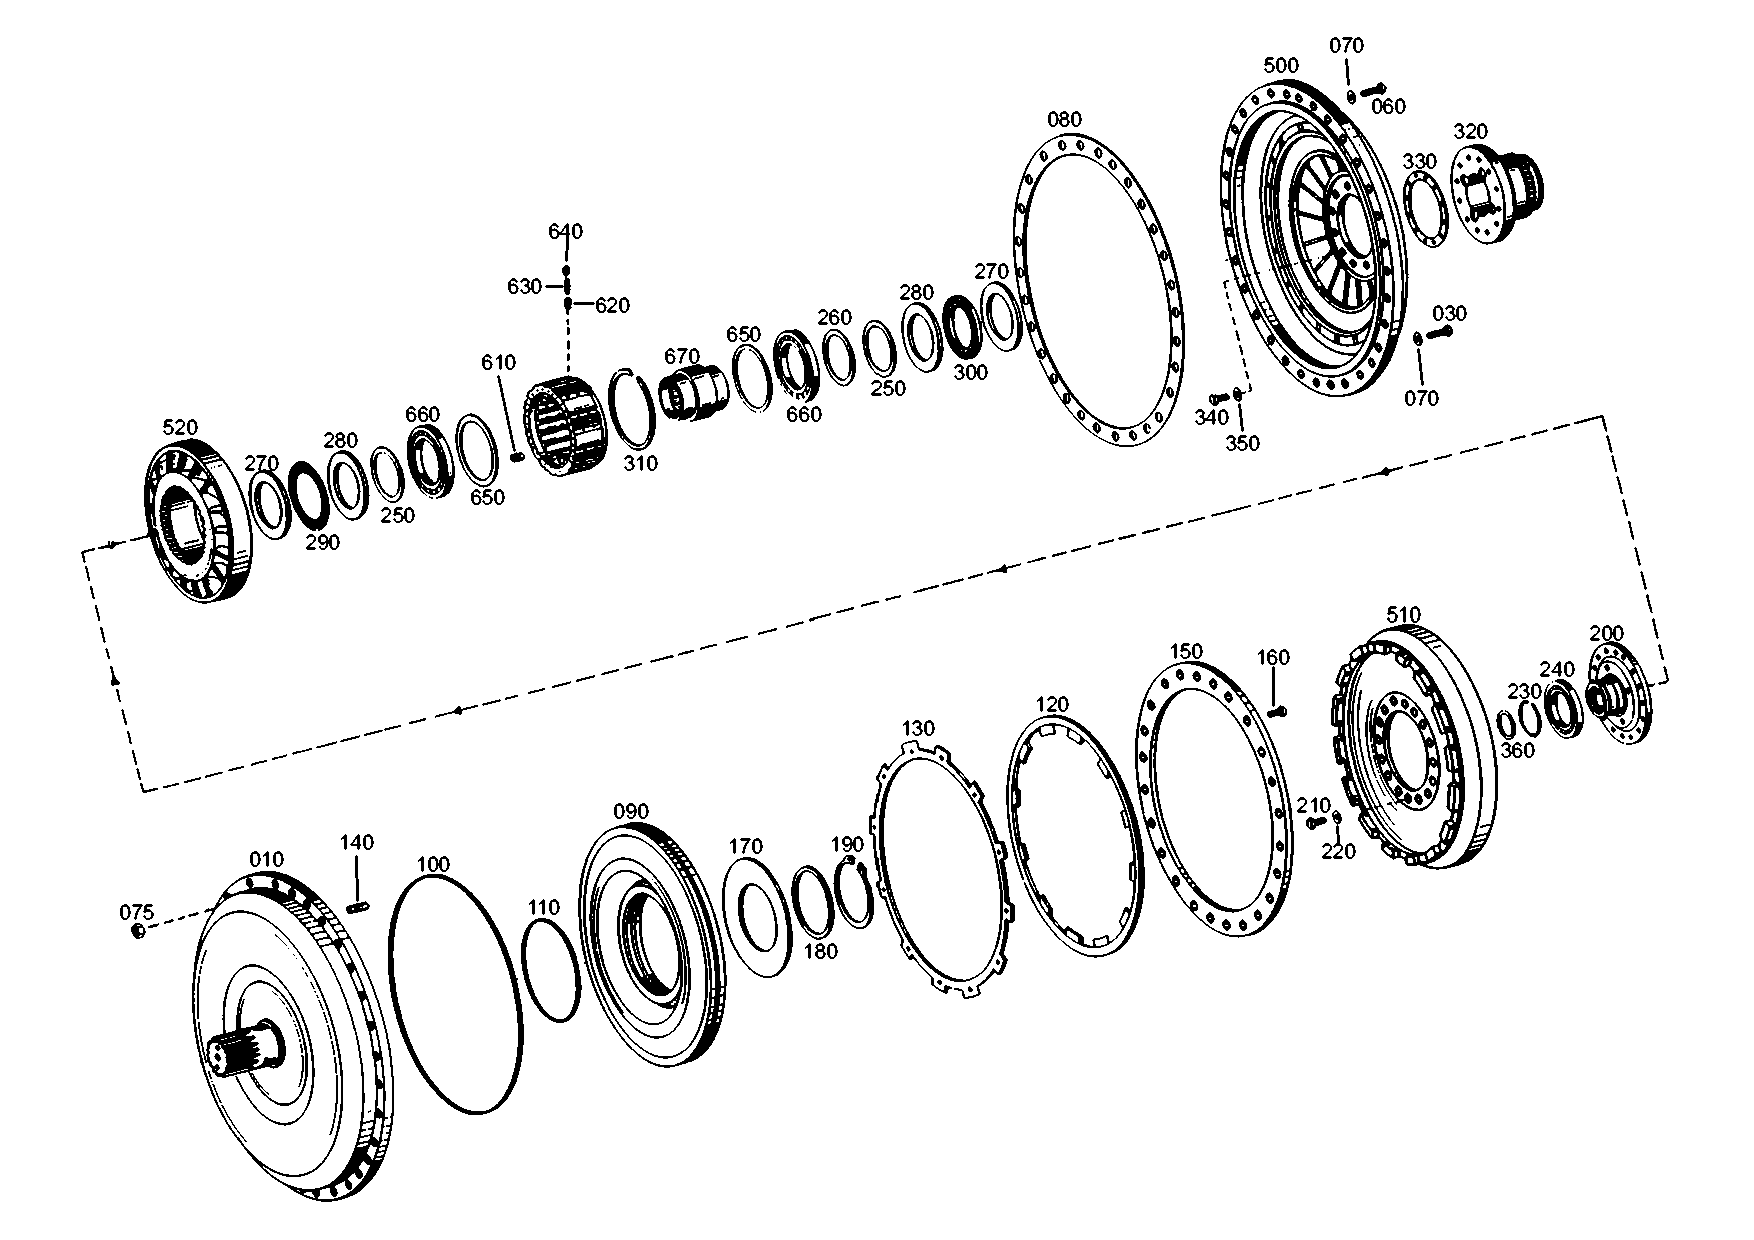 drawing for NOELL GMBH 141802119 - PLATE PISTON (figure 4)